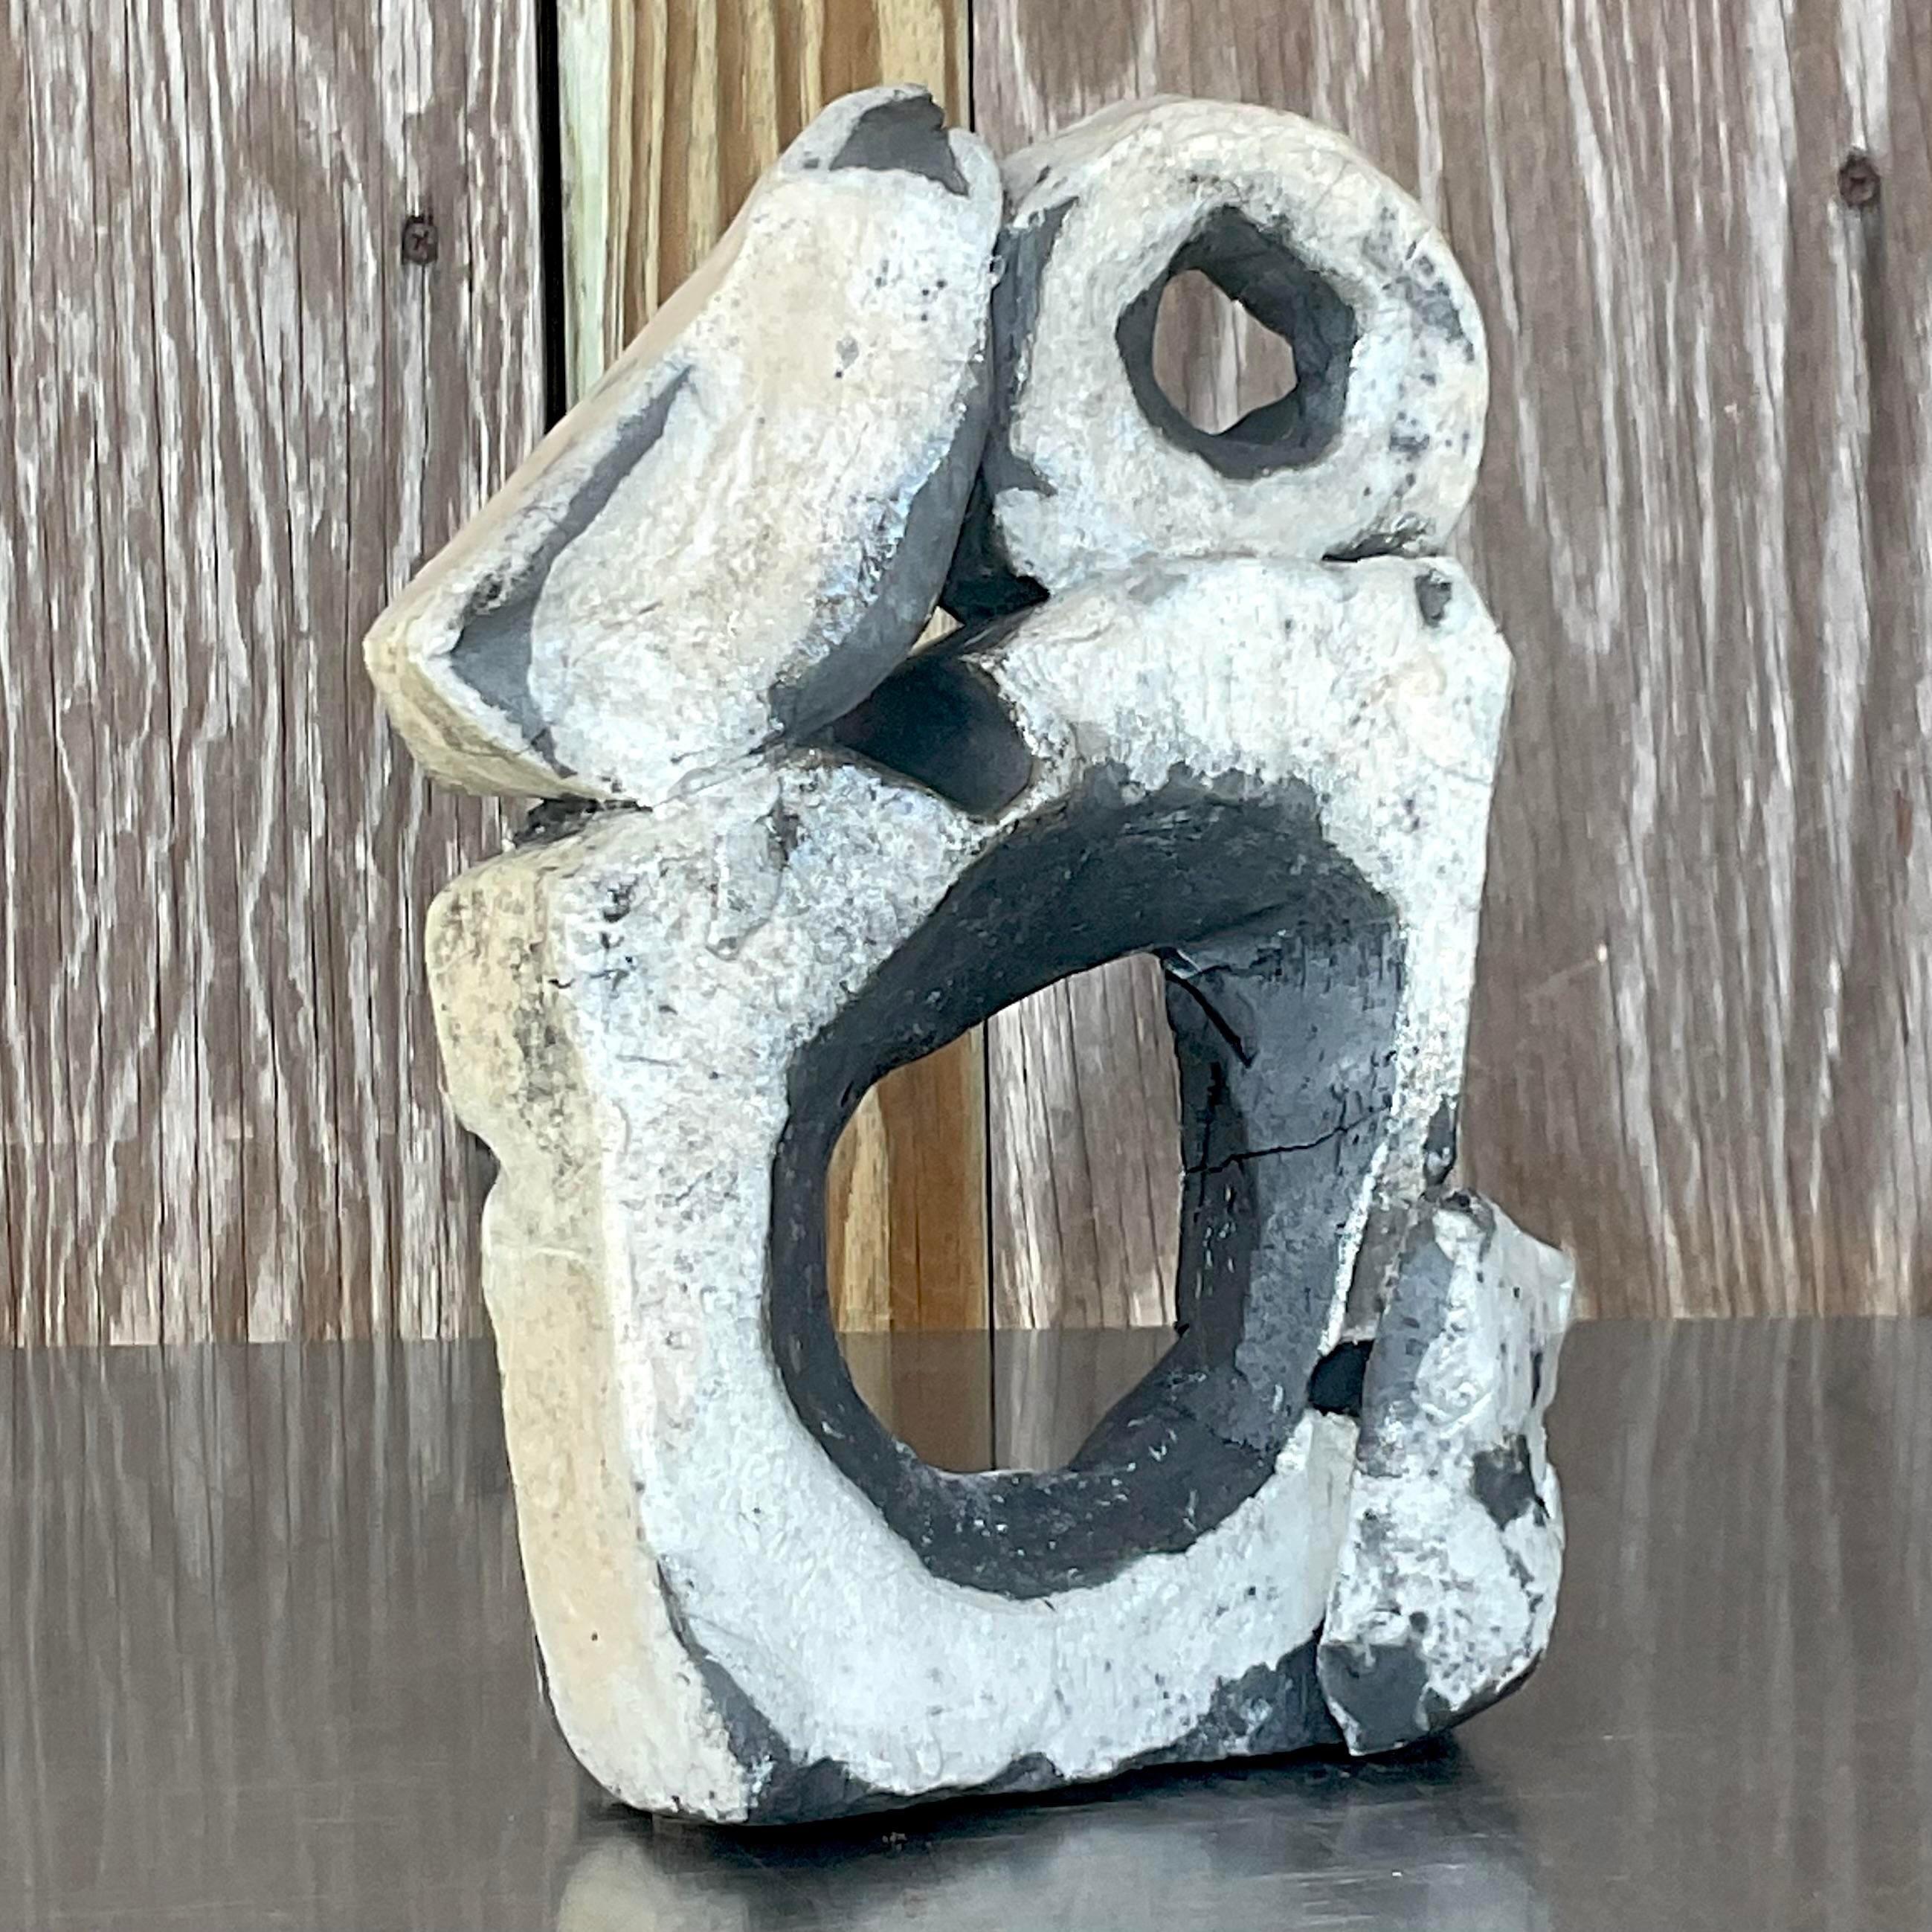 An exceptional vintage Boho ceramic sculpture. A chic Abstract composition with a graphic black and white scorched finish. Stamped by the artist C. Heck. Acquired from a Palm Beach estate.